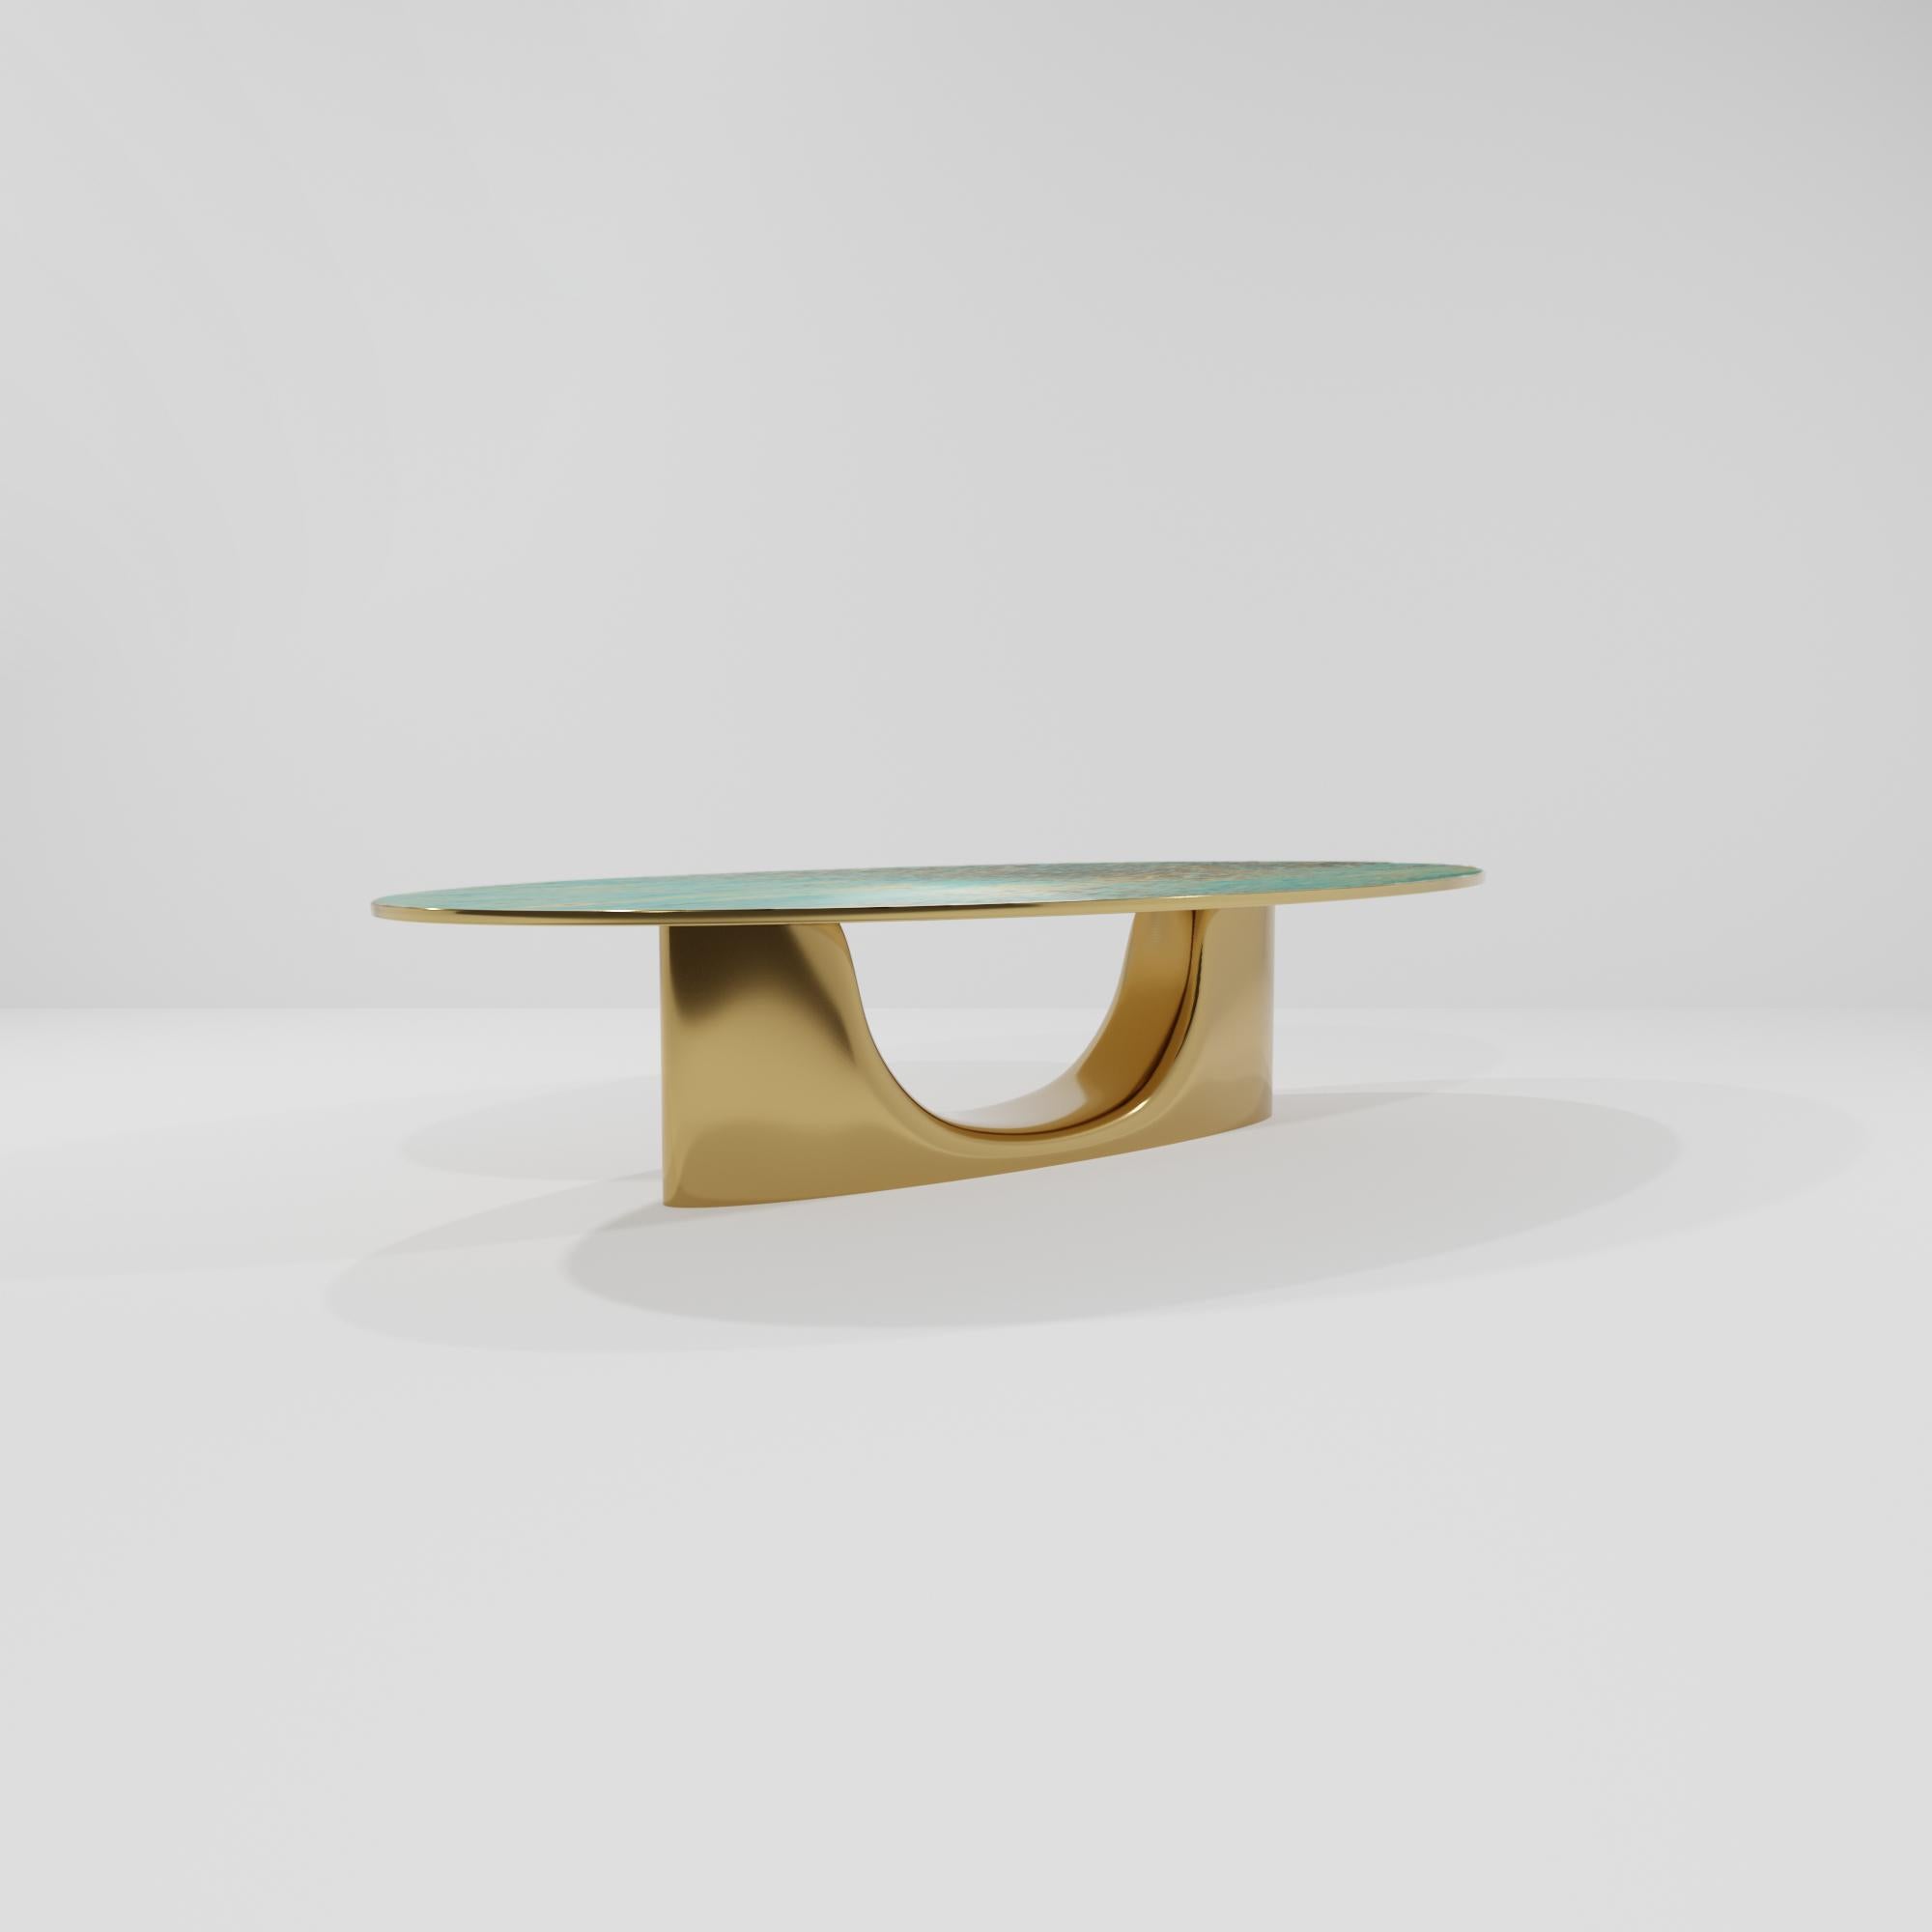 The BIS dining table is a Studio SORS. 2021 Collection piece that is made entirely by the hand of a single artisan. Hand carved solid wood is bronze cast and polished, the tabletop surface features a hand developed blue green copper finish that